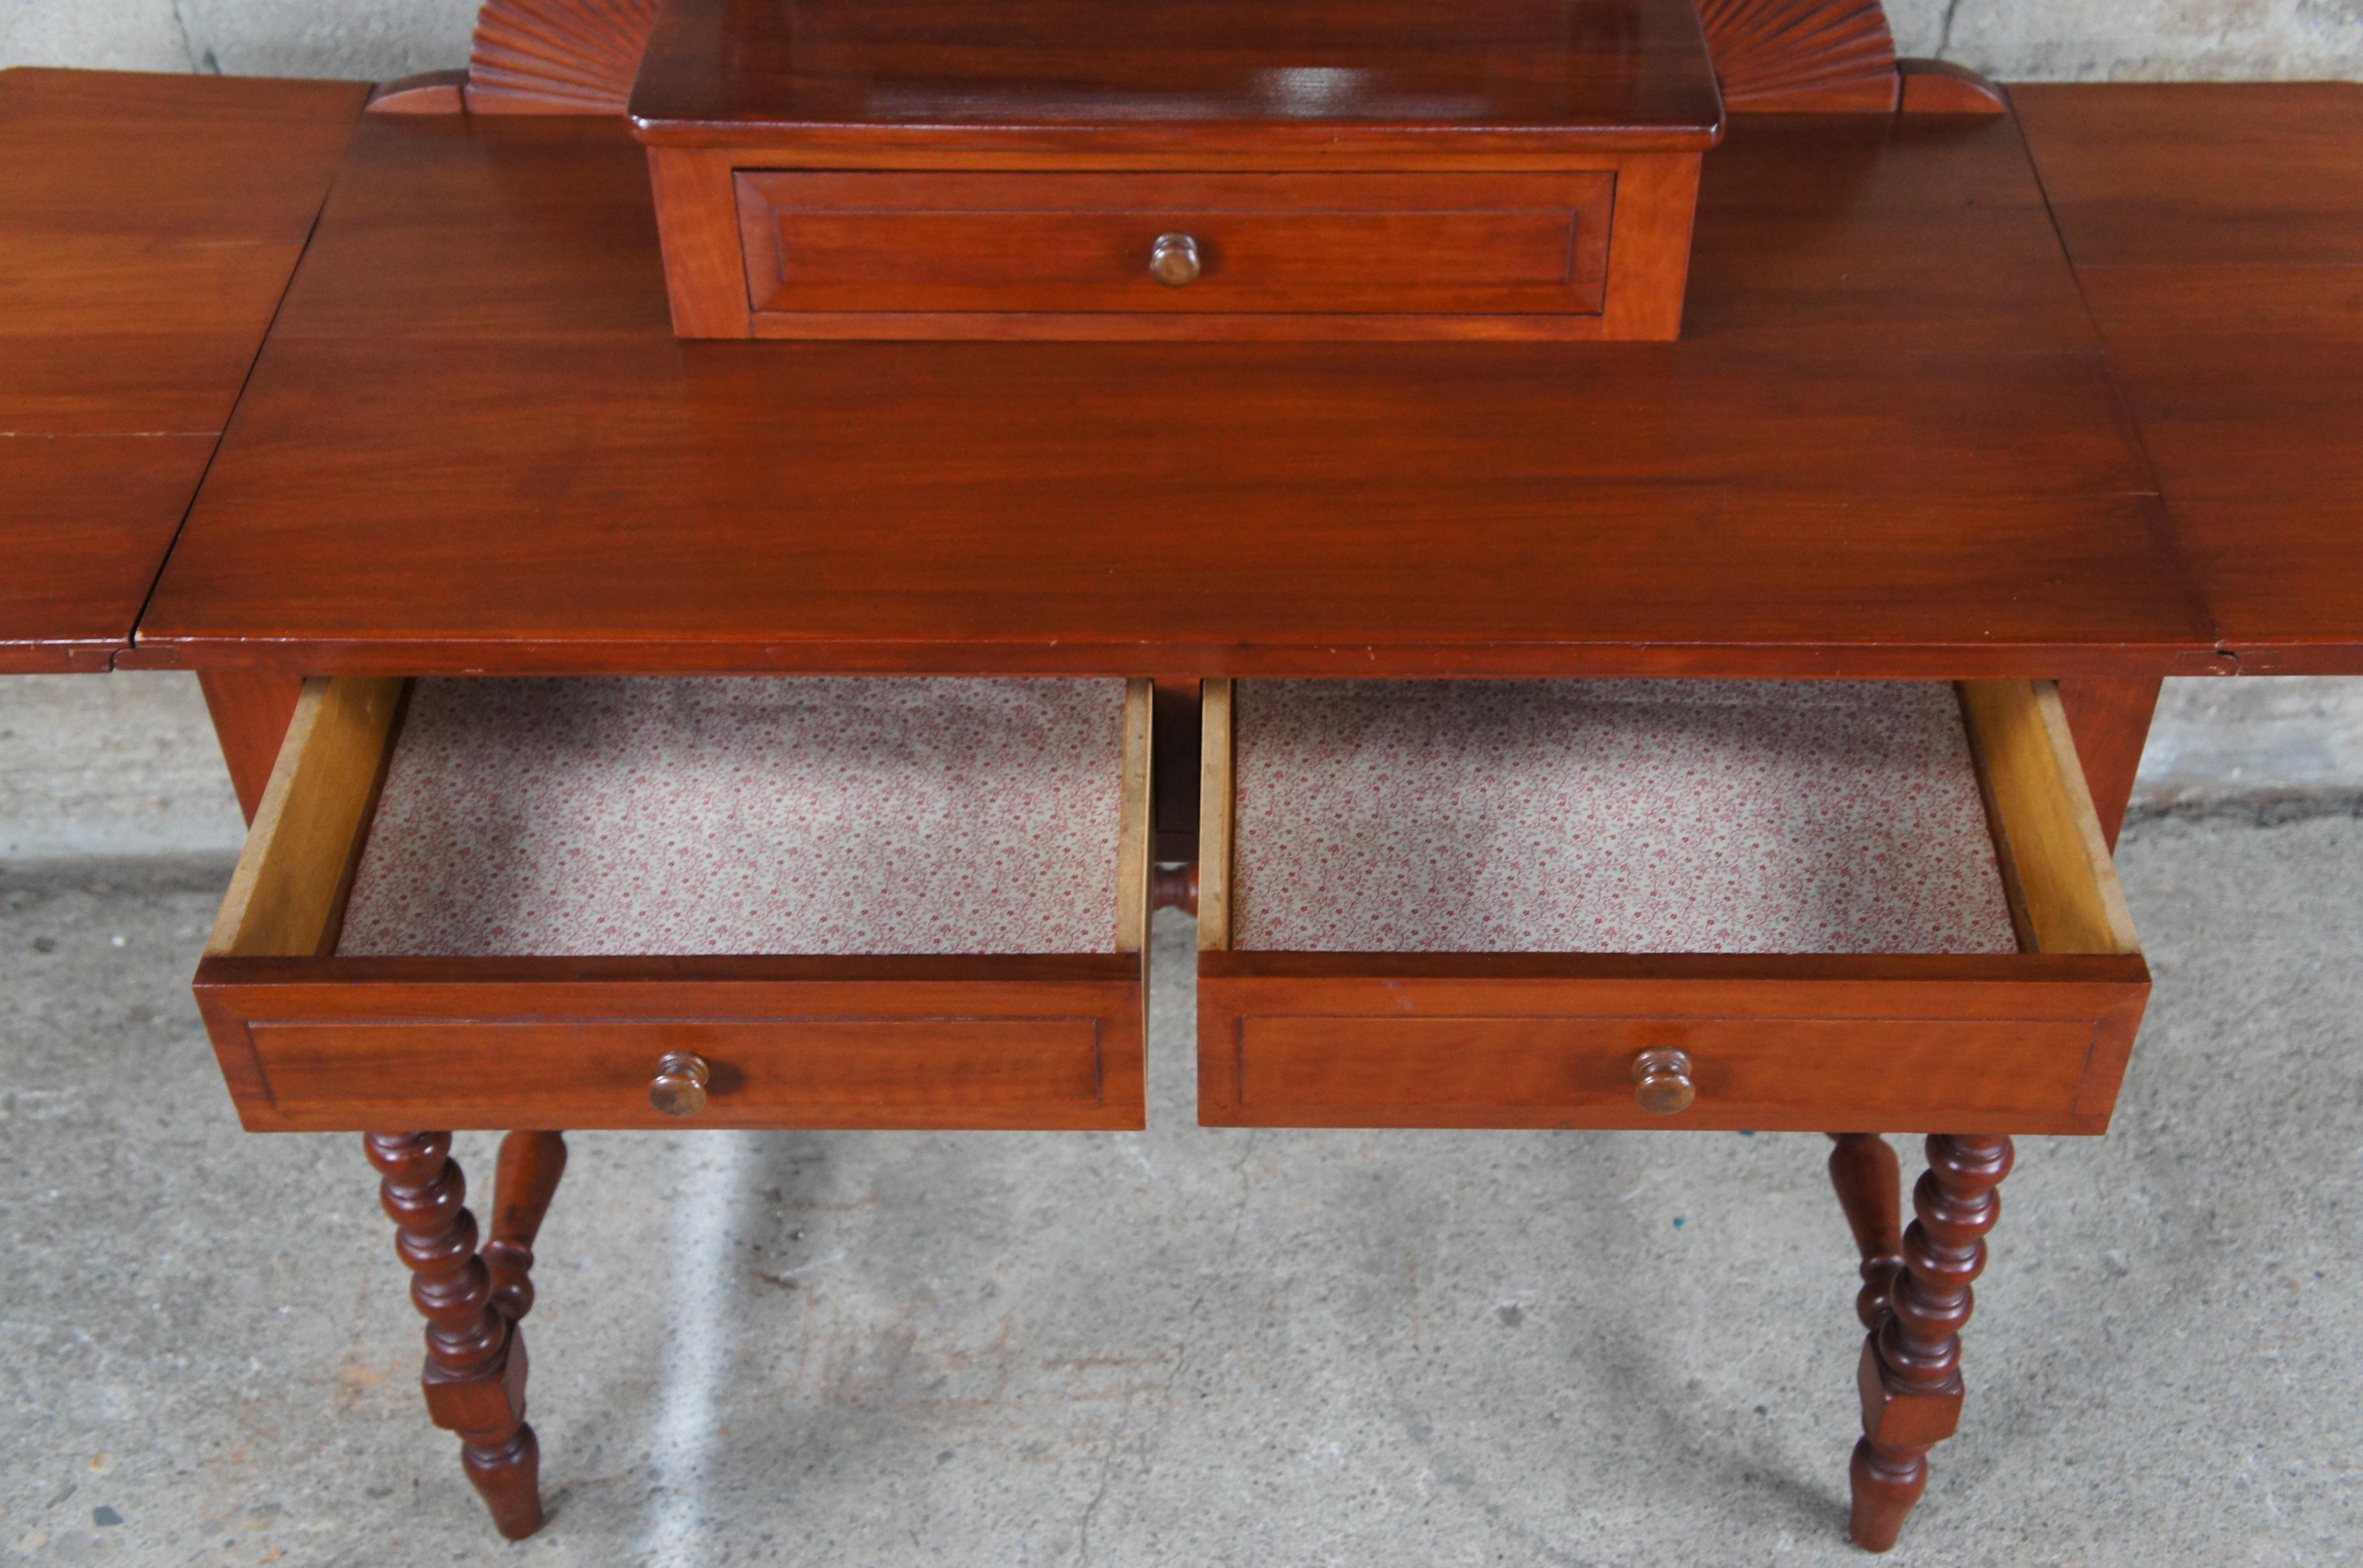 Antique Handmade Early American Cherry Drop Leaf Dressing Table Vanity Bench 2